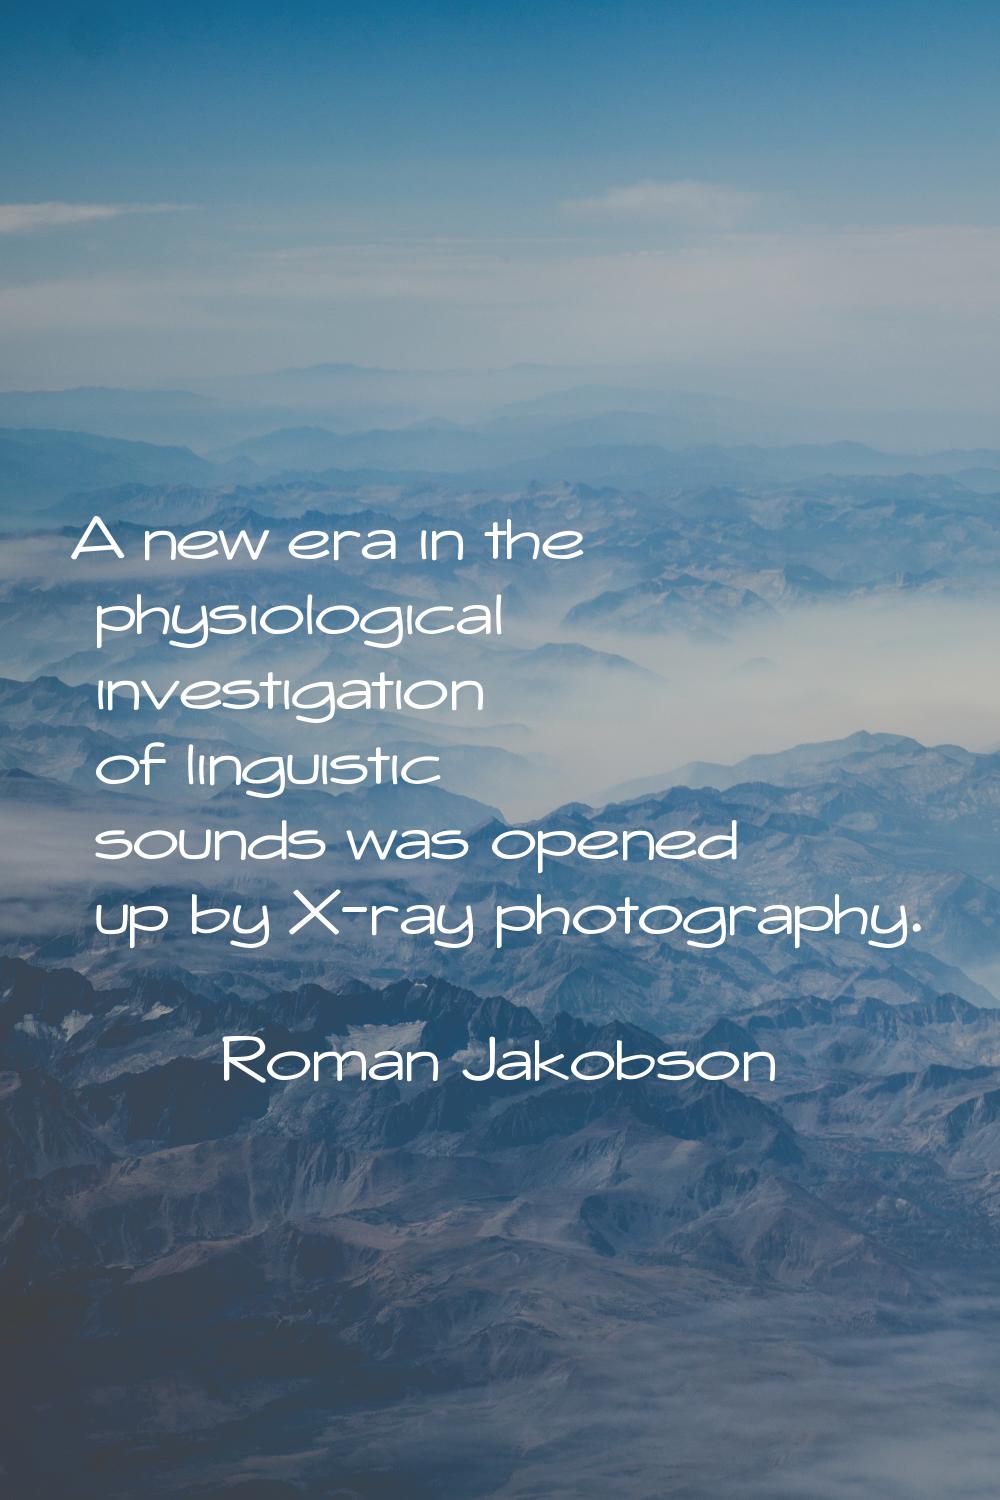 A new era in the physiological investigation of linguistic sounds was opened up by X-ray photograph